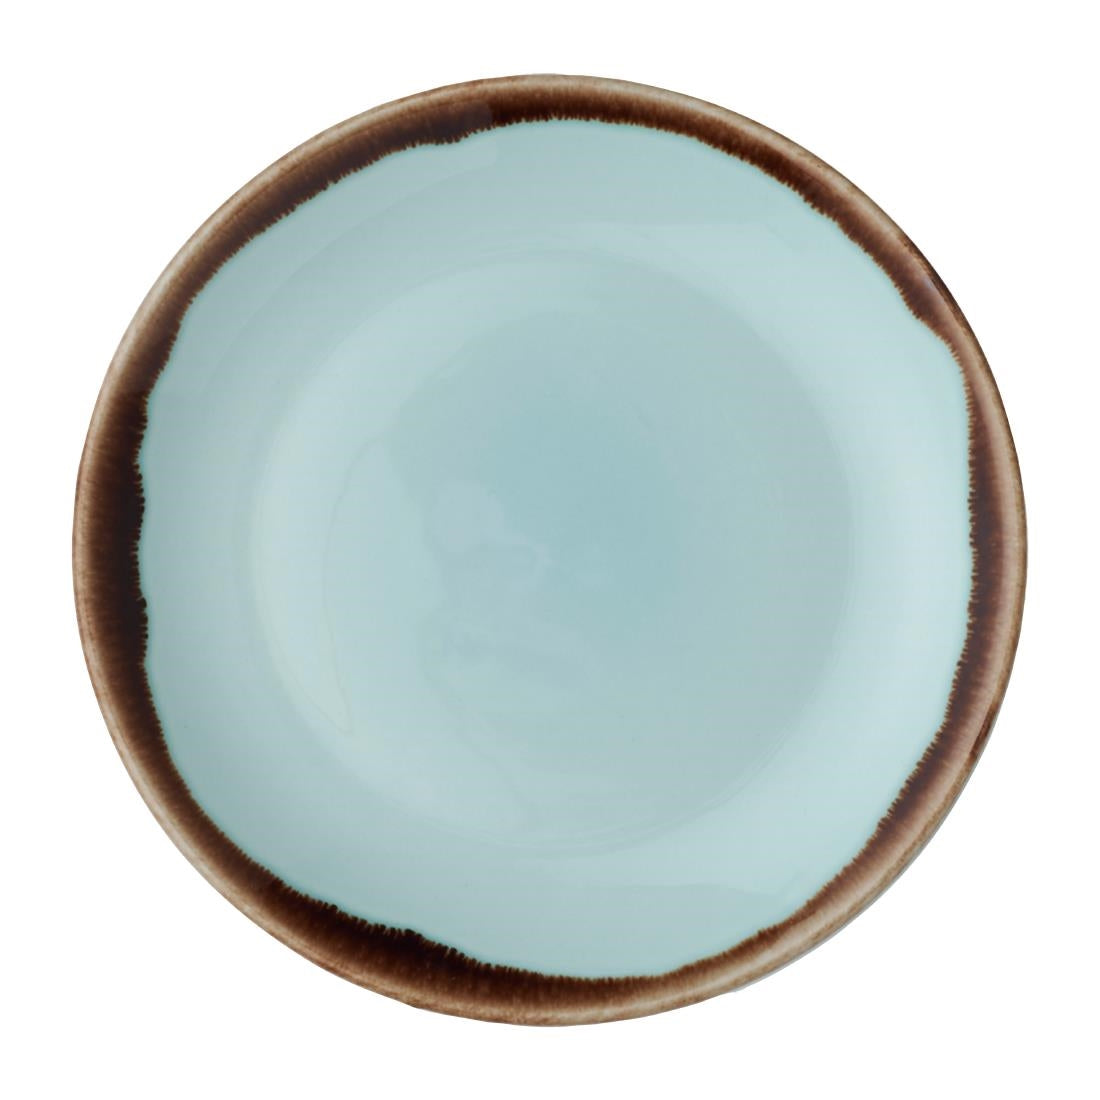 FX167 Dudson Harvest Coupe Plates Turquoise 165mm (Pack of 12) JD Catering Equipment Solutions Ltd